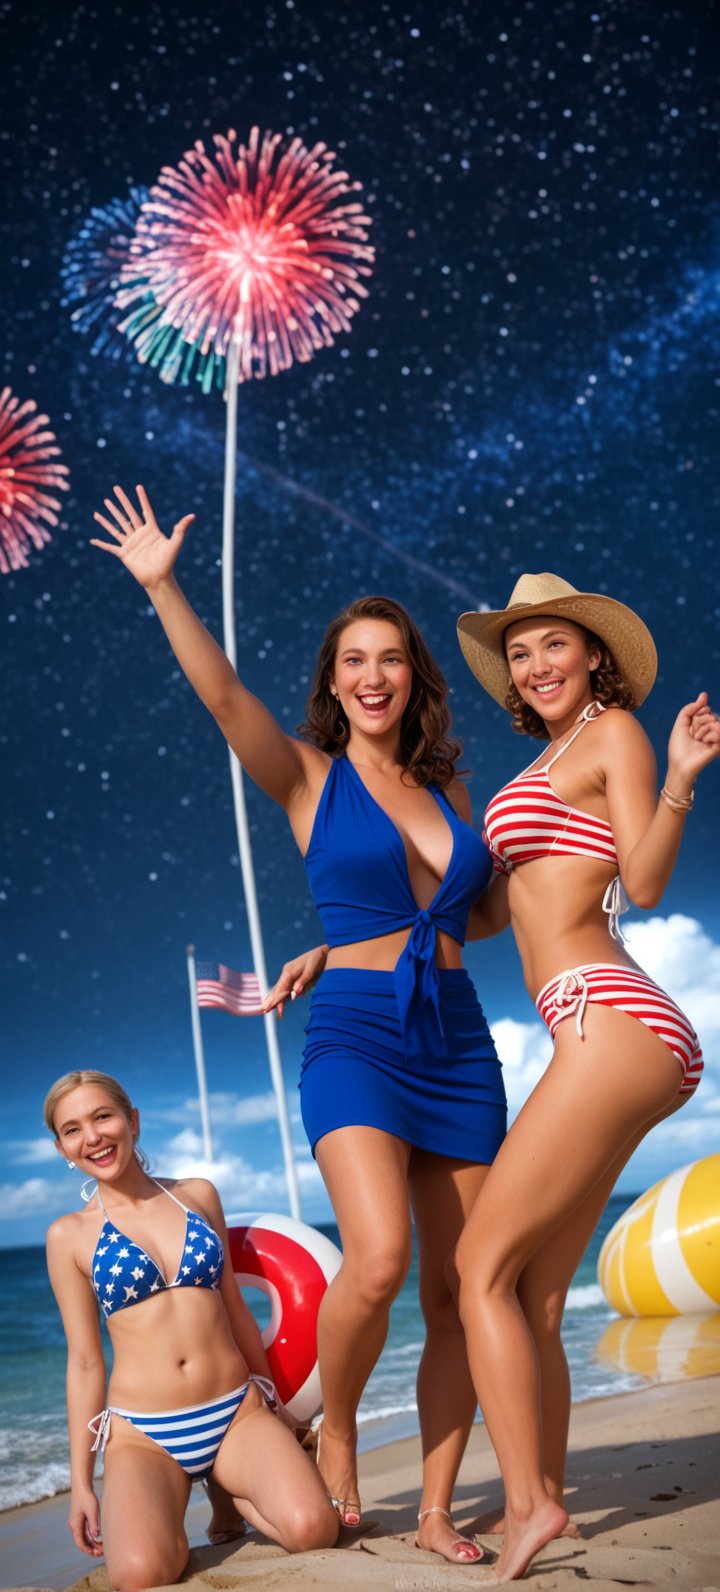 A vibrant tableau captures the essence of American unity and joy. Ten stunning women from diverse ethnic backgrounds come together to celebrate Independence Day. Dressed in red, white, and blue, they embody patriotism with sizzling swimsuits, stars-and-stripes bikinis, and gleaming cowboy hats. Amidst a backdrop of twinkling fireworks, American flags wave proudly as the ladies strike sultry poses, their faces aglow under the starry night sky.